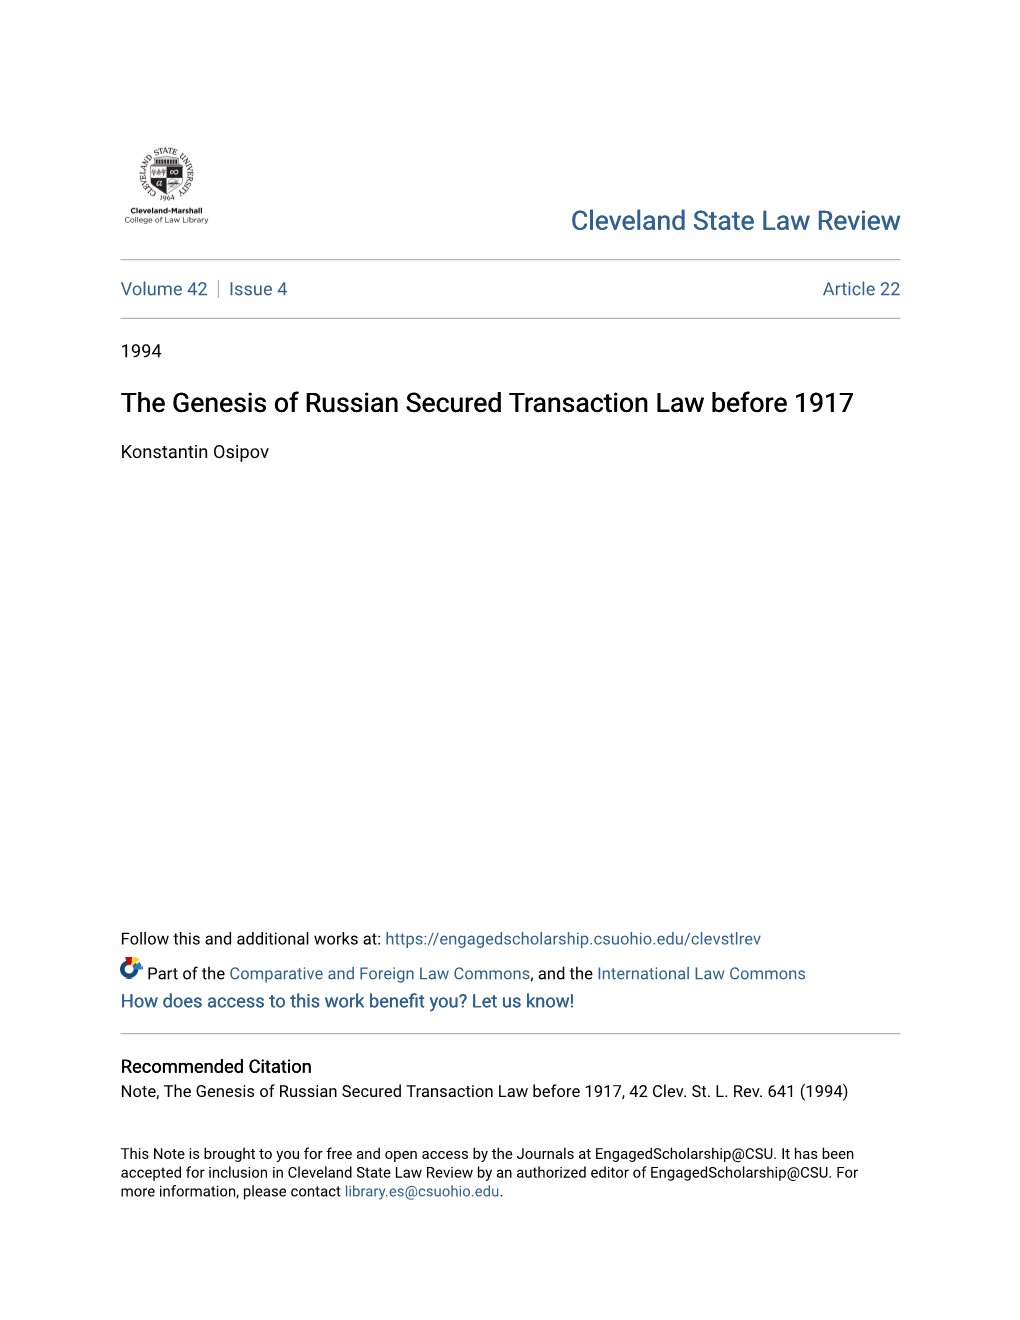 The Genesis of Russian Secured Transaction Law Before 1917